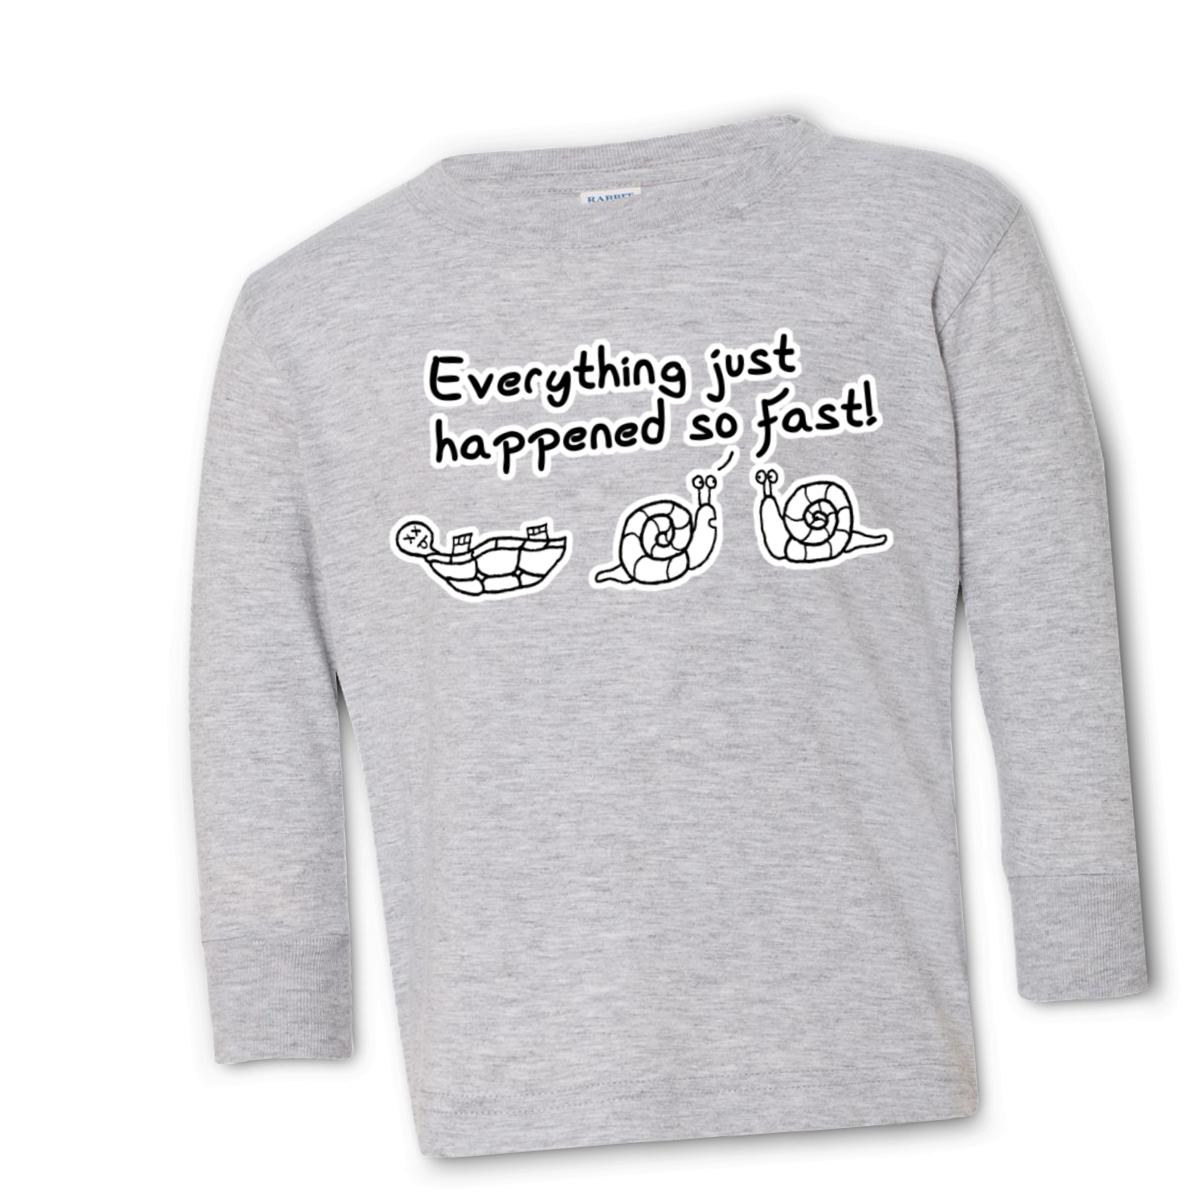 Happened So Fast Toddler Long Sleeve Tee 4T heather